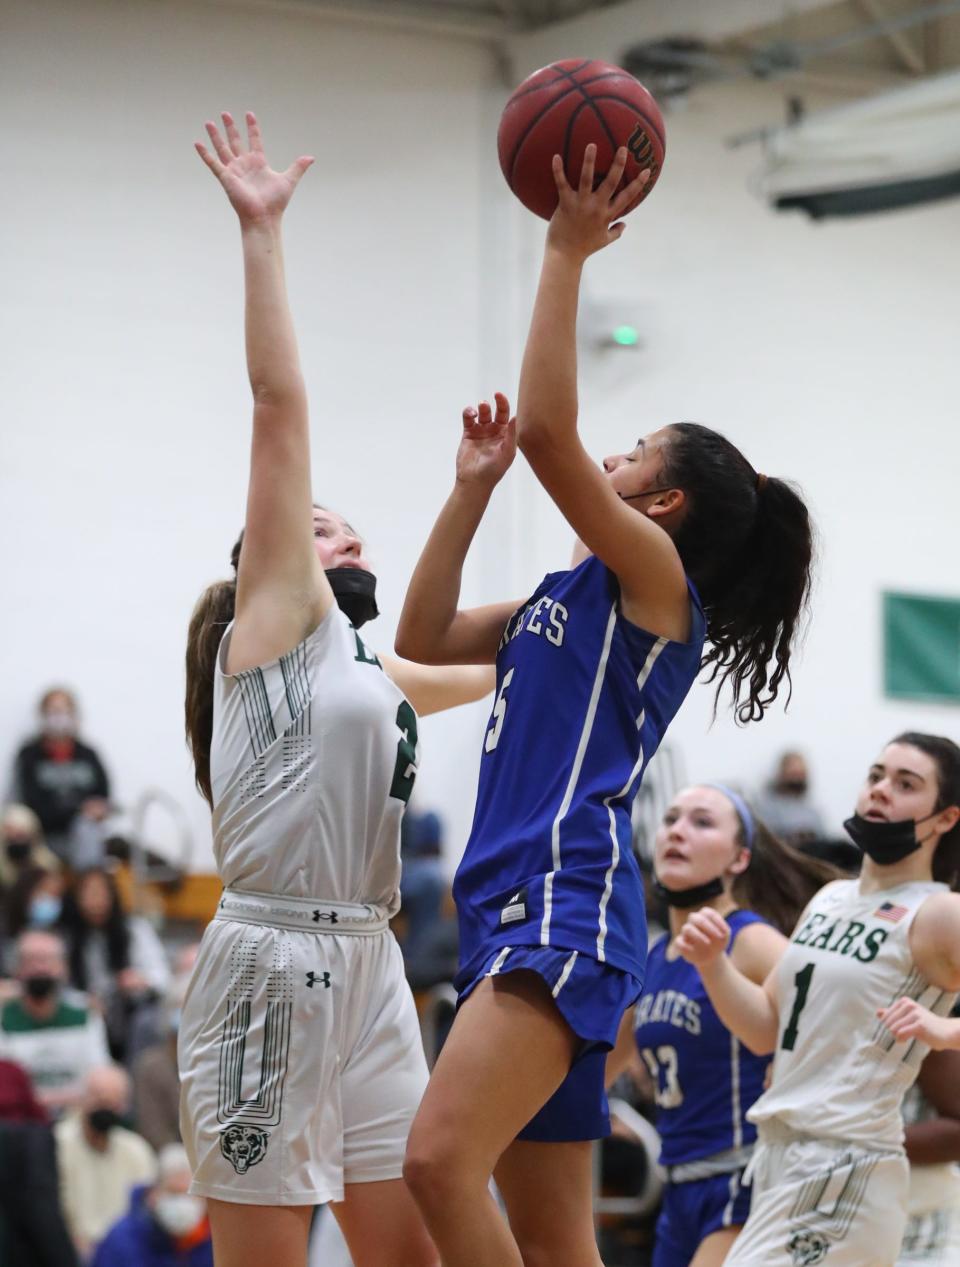 Pearl River's Mady Moroney (5) drives on Brewster's Grace Galgano (2) during  the opening round of Section 1 Class A playoffs at Brewster High School on Saturday, February 19, 2022. 